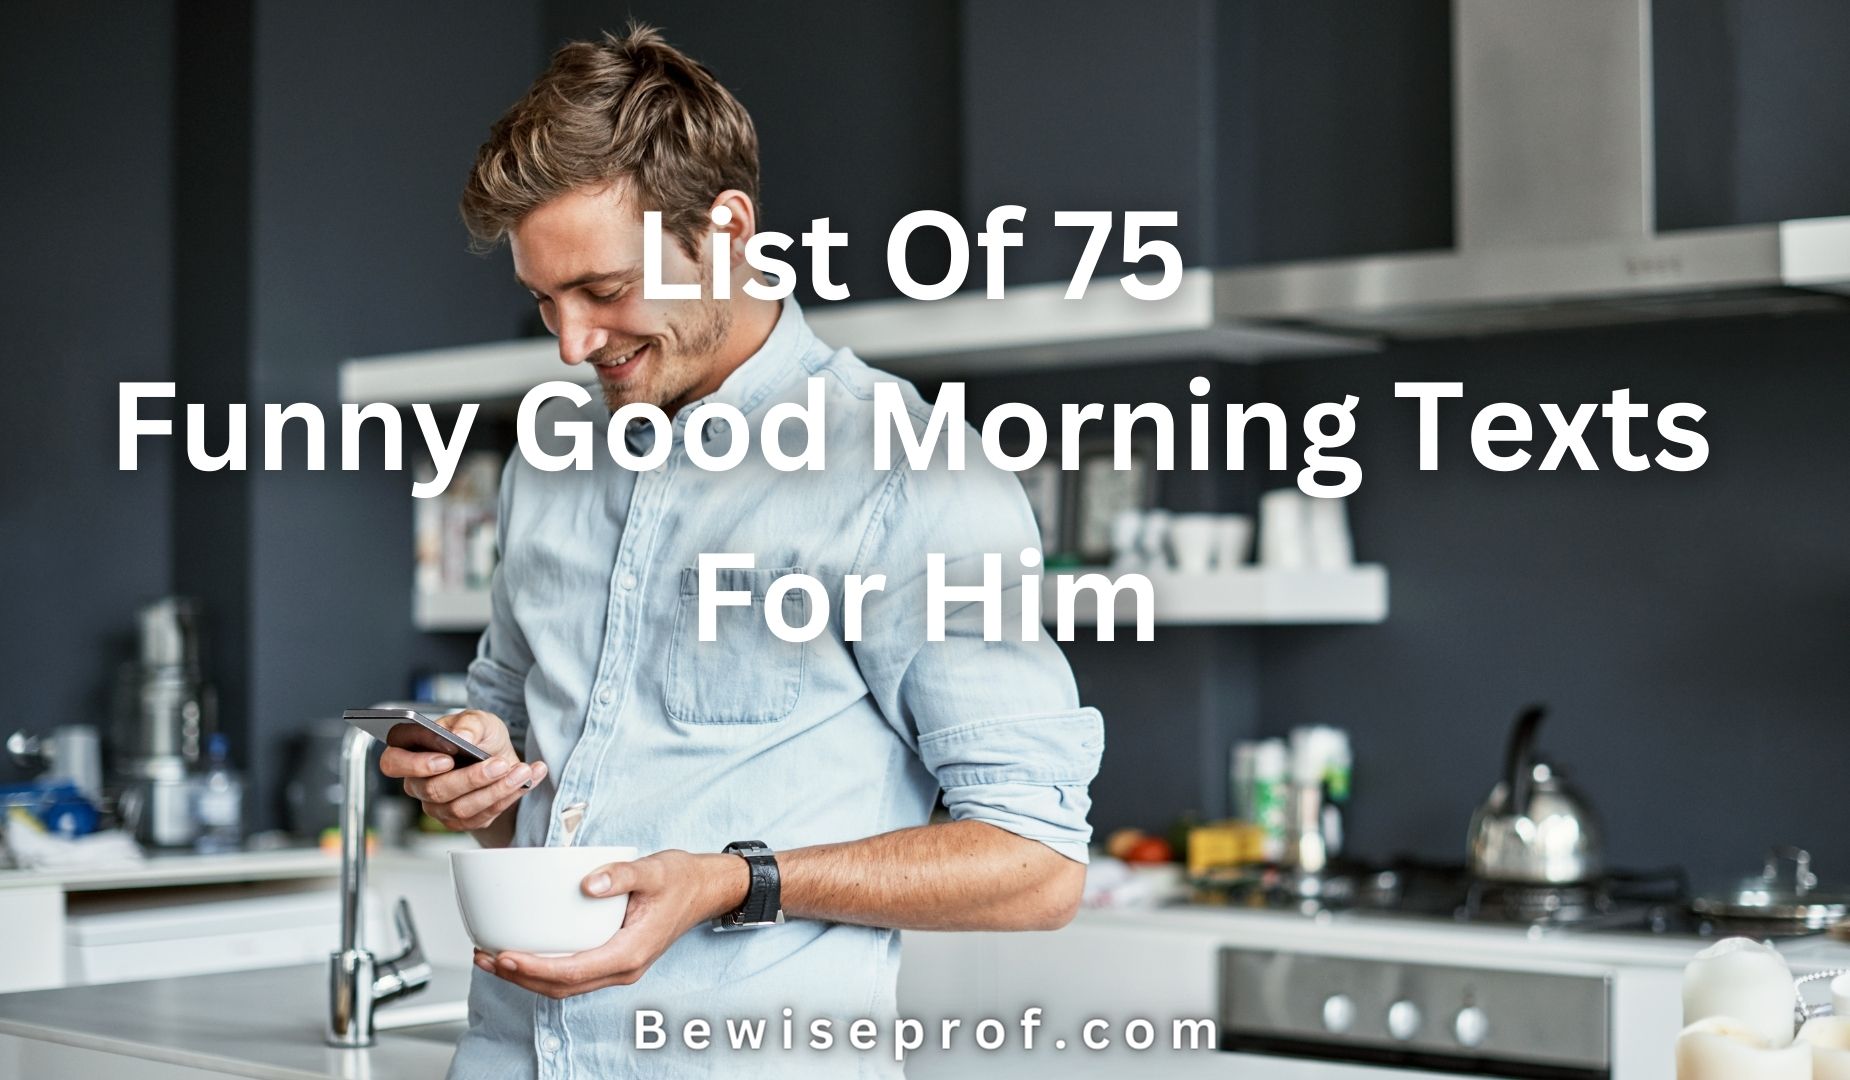 List Of 75 Funny Good Morning Texts For Him